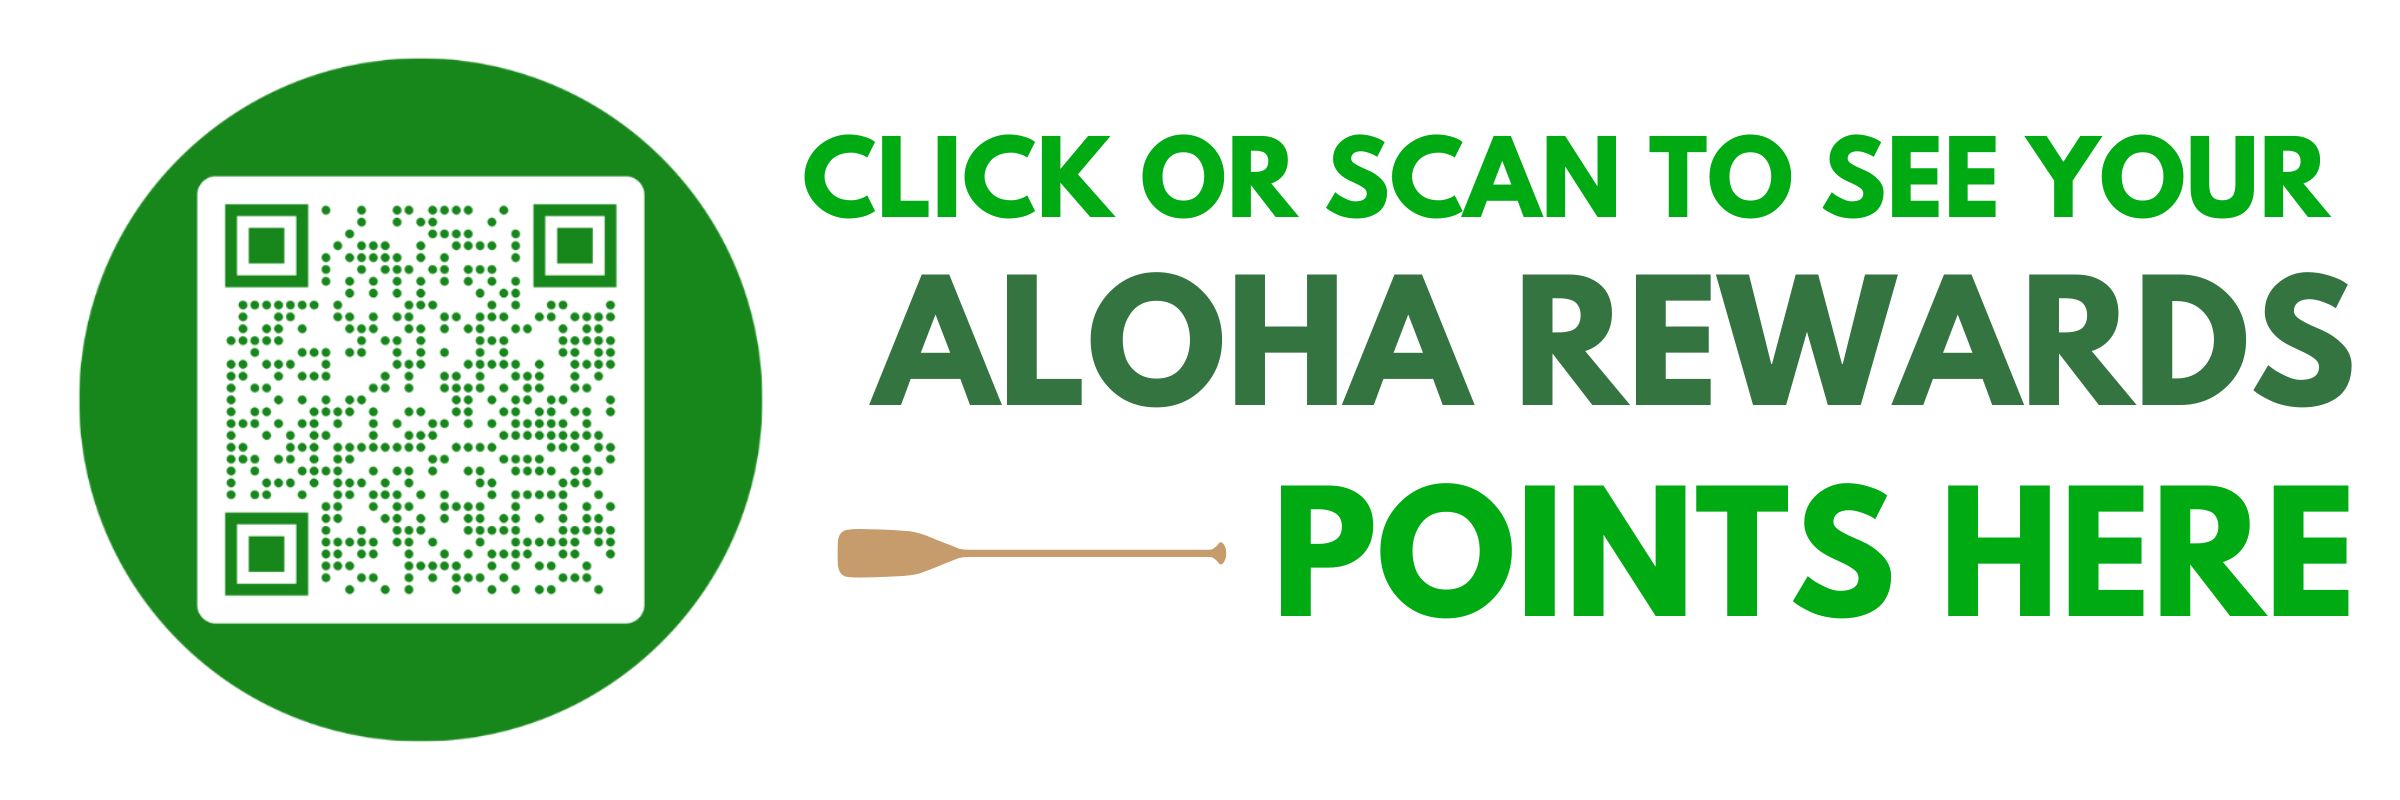 Click on this image to register or view your Aloha Rewards.